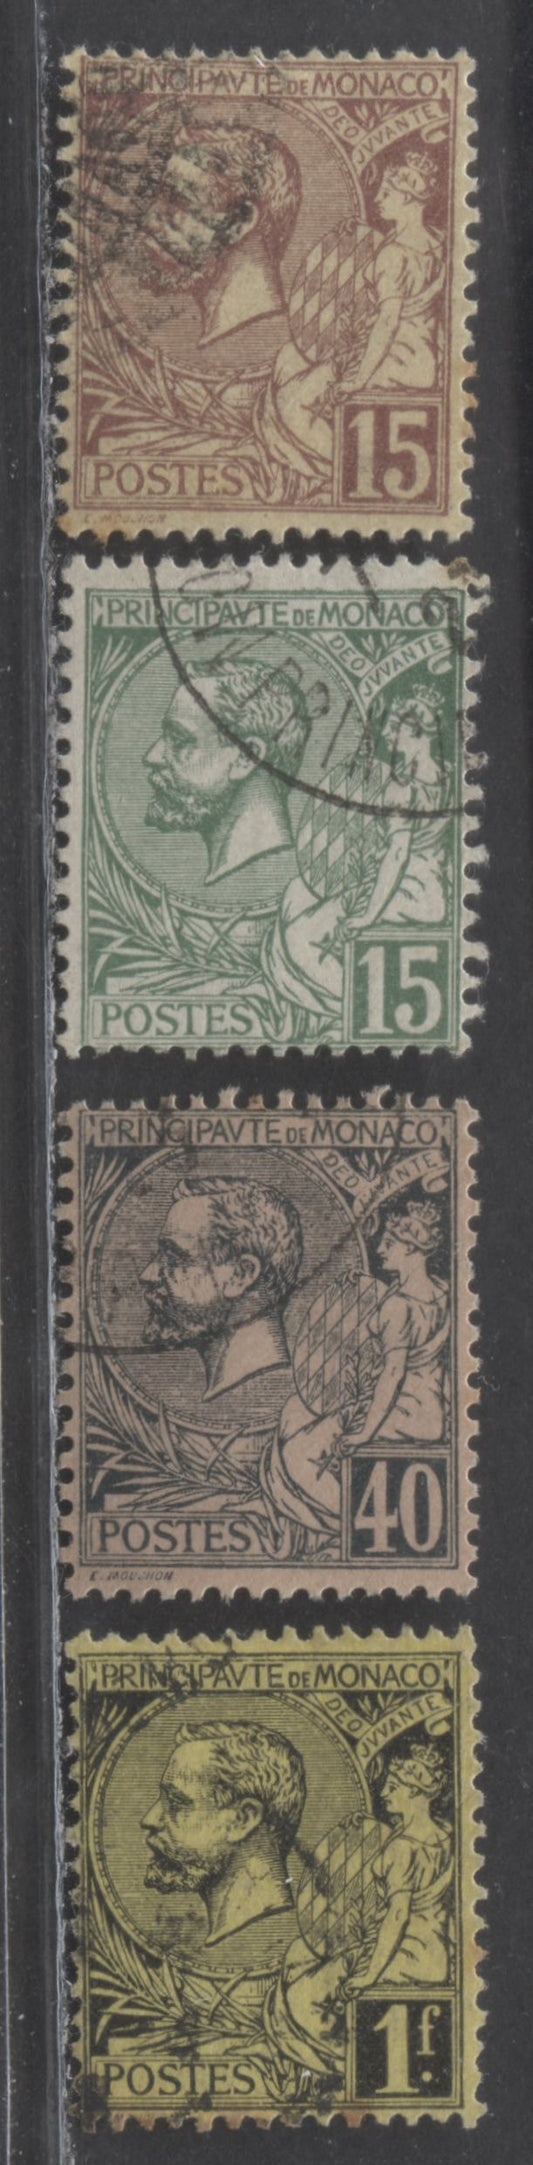 Lot 66 Monaco SC#18/26 1891-1921 Prince Albert I Issue, 4 Very Good/Fine Used Singles, Click on Listing to See ALL Pictures, 2022 Scott Classic Cat. $40 USD